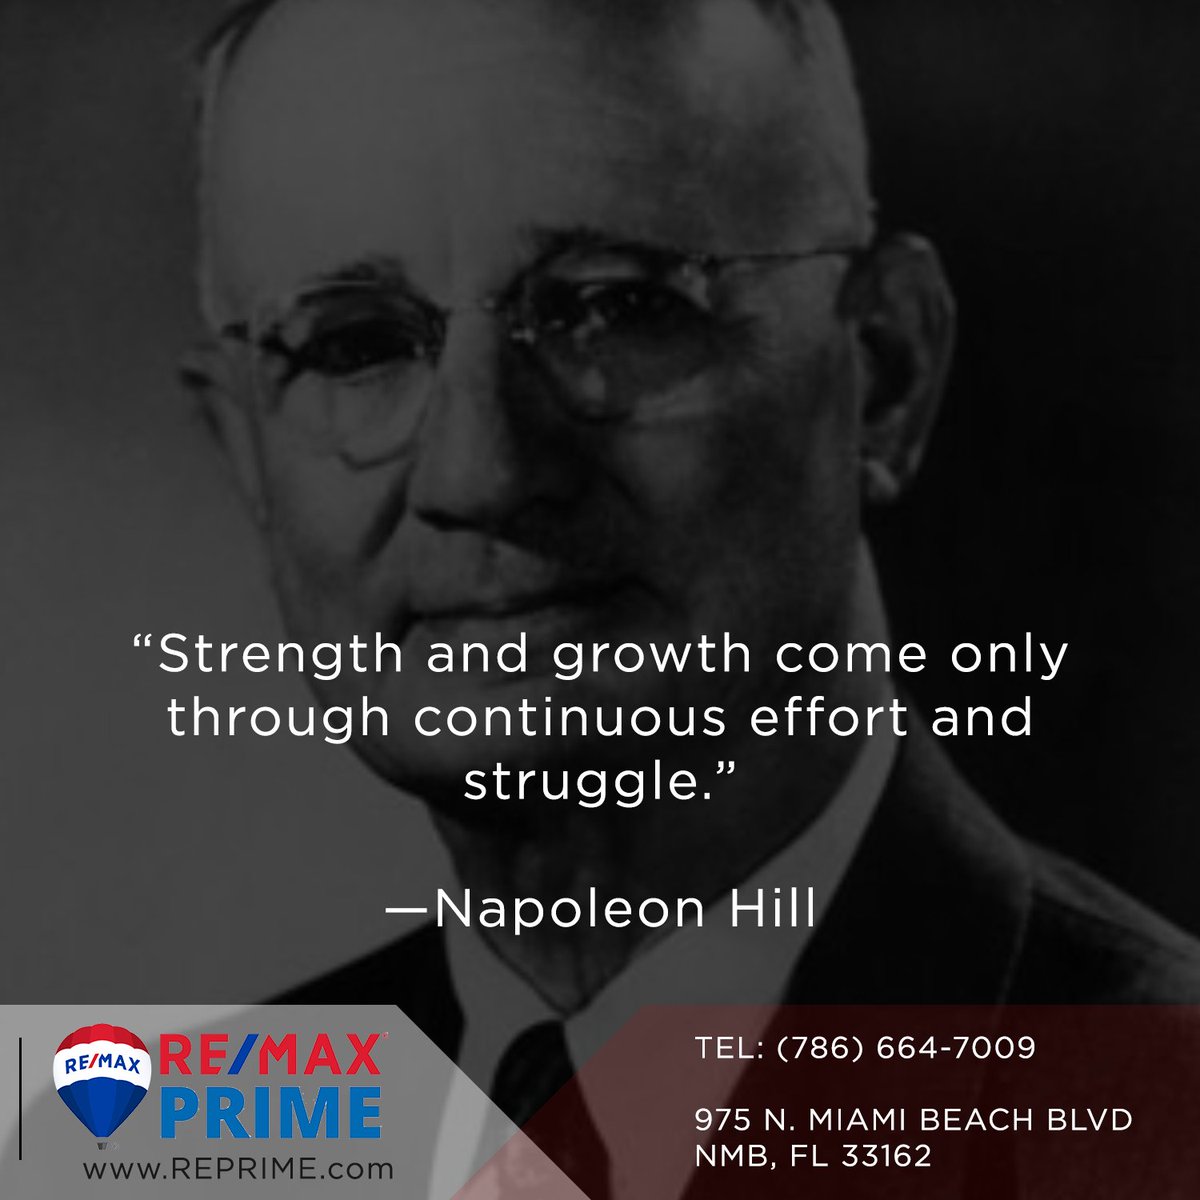 “Strength and growth come only through continuous effort and struggle.” —Napoleon Hill #staystrong #napoleonhill #inspirationalquotes #bestrong #committoefforts #overcomestruggles #howstrongareyou